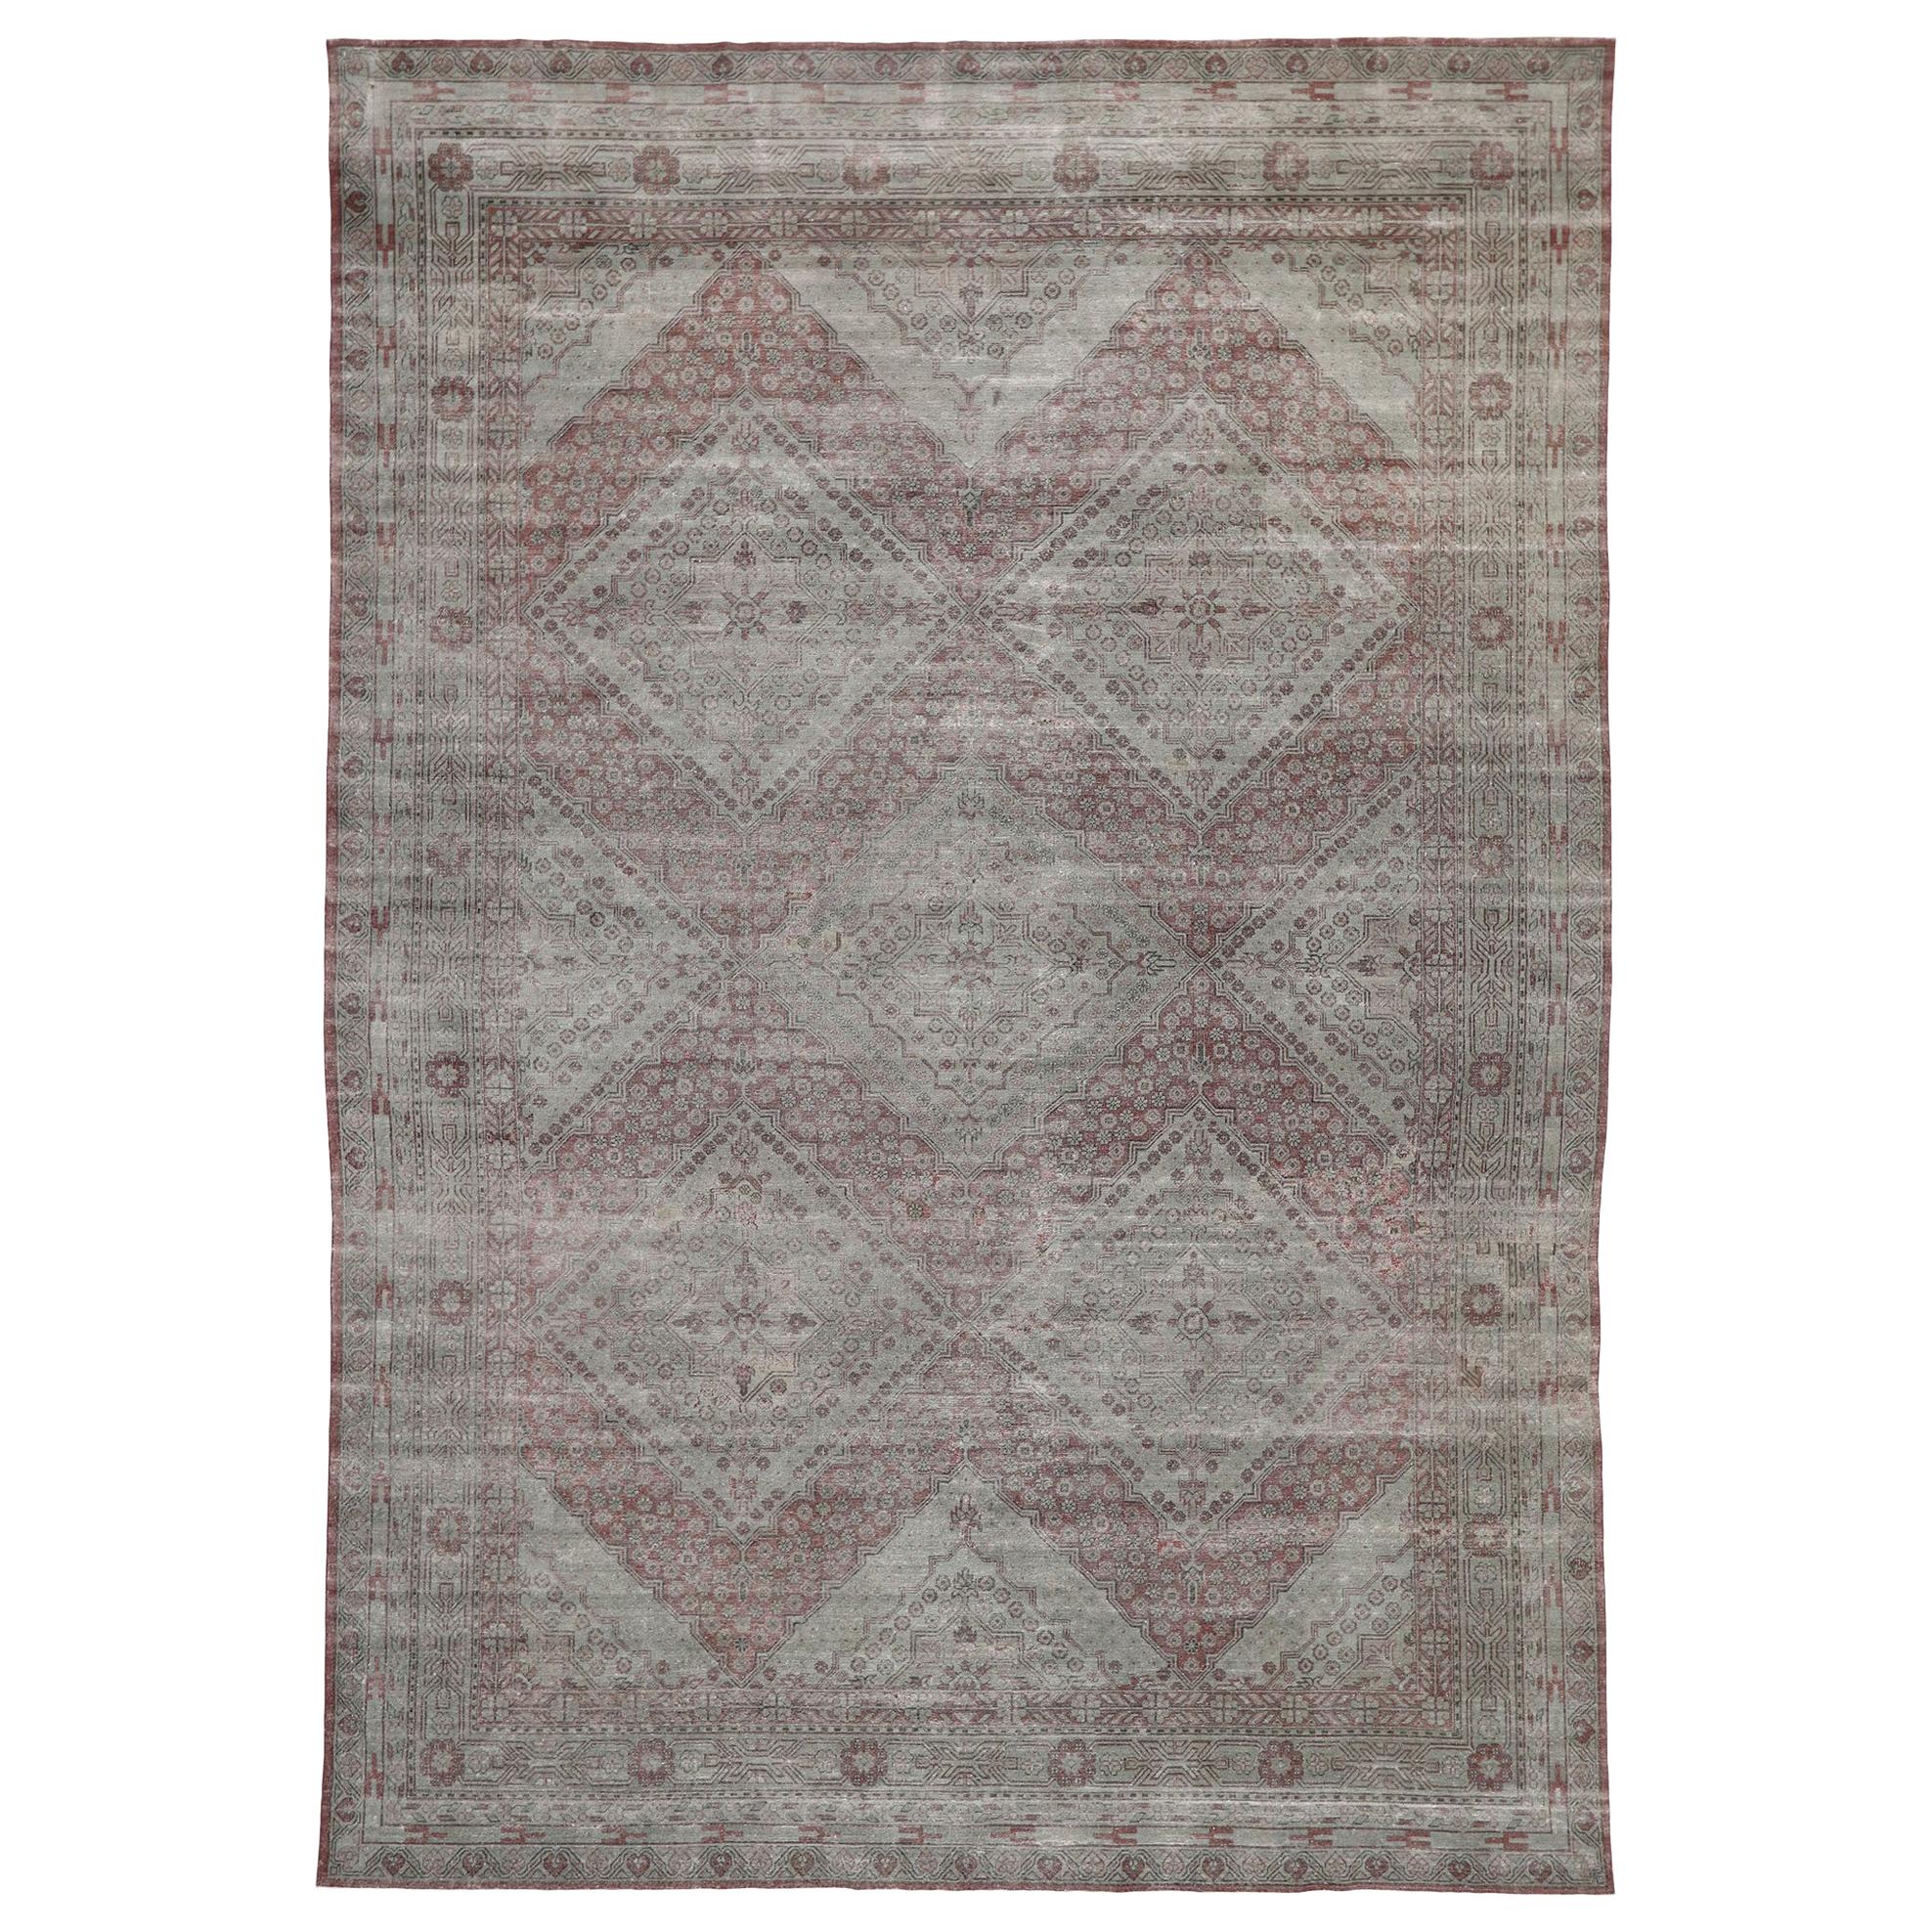 Distressed Antique Persian Khotan Rug with American Colonial Williamsburg Style